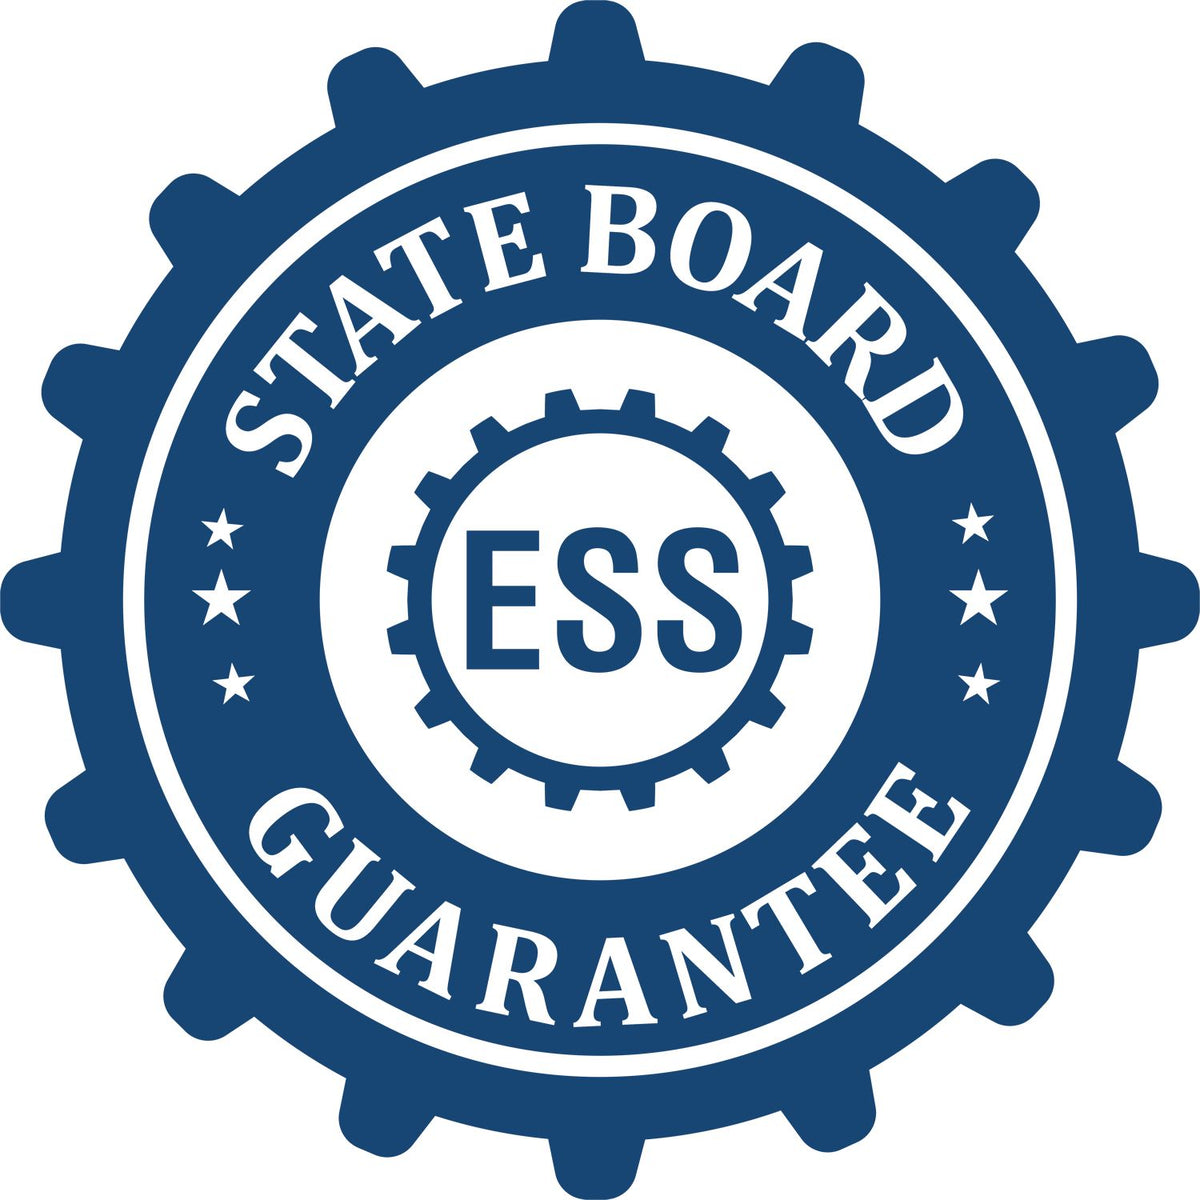 An emblem in a gear shape illustrating a state board guarantee for the Wooden Handle Massachusetts State Seal Notary Public Stamp product.